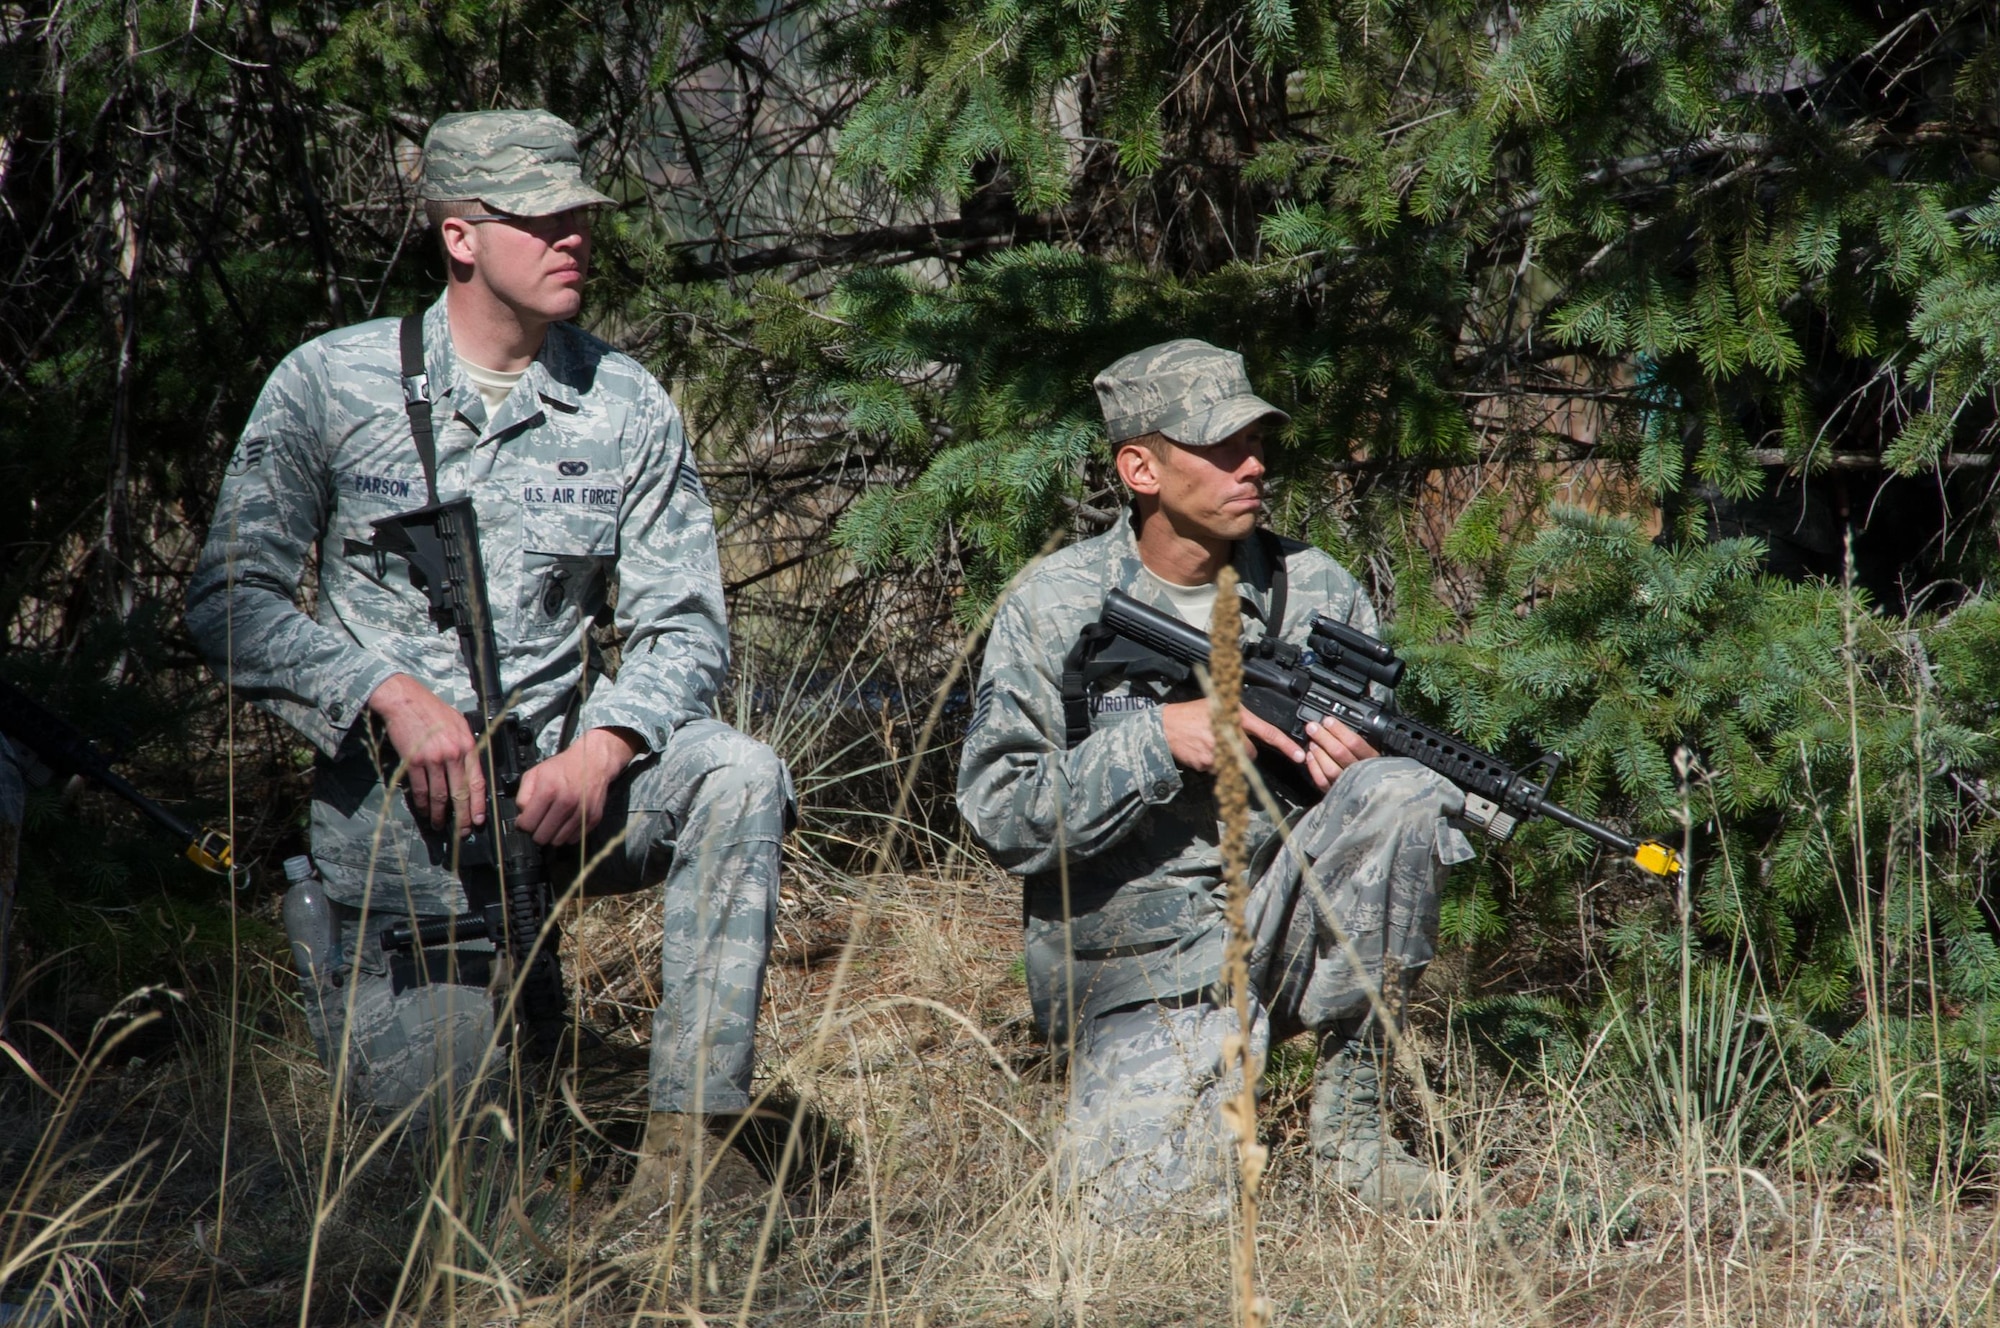 SCHREIVER AIR FORCE BASE, Colo. -- Senior Airman Tyler Farson, 10th Security Forces Squadron, and Tech. Sgt. Luke Jurotich, 710th SFS, keep watch over their position during the 2017 Reduced Combat Leaders Course, held at the U.S. Air Force Academy in Colorado, on Friday, Apr. 7th, 2017. The course provides seven days of classroom and field training exercises that focus on developing combat leadership skills of junior non-commissioned officers and company grade officers in the Security Forces career field. (U.S. Air Force photo/Senior Airman Laura Turner)